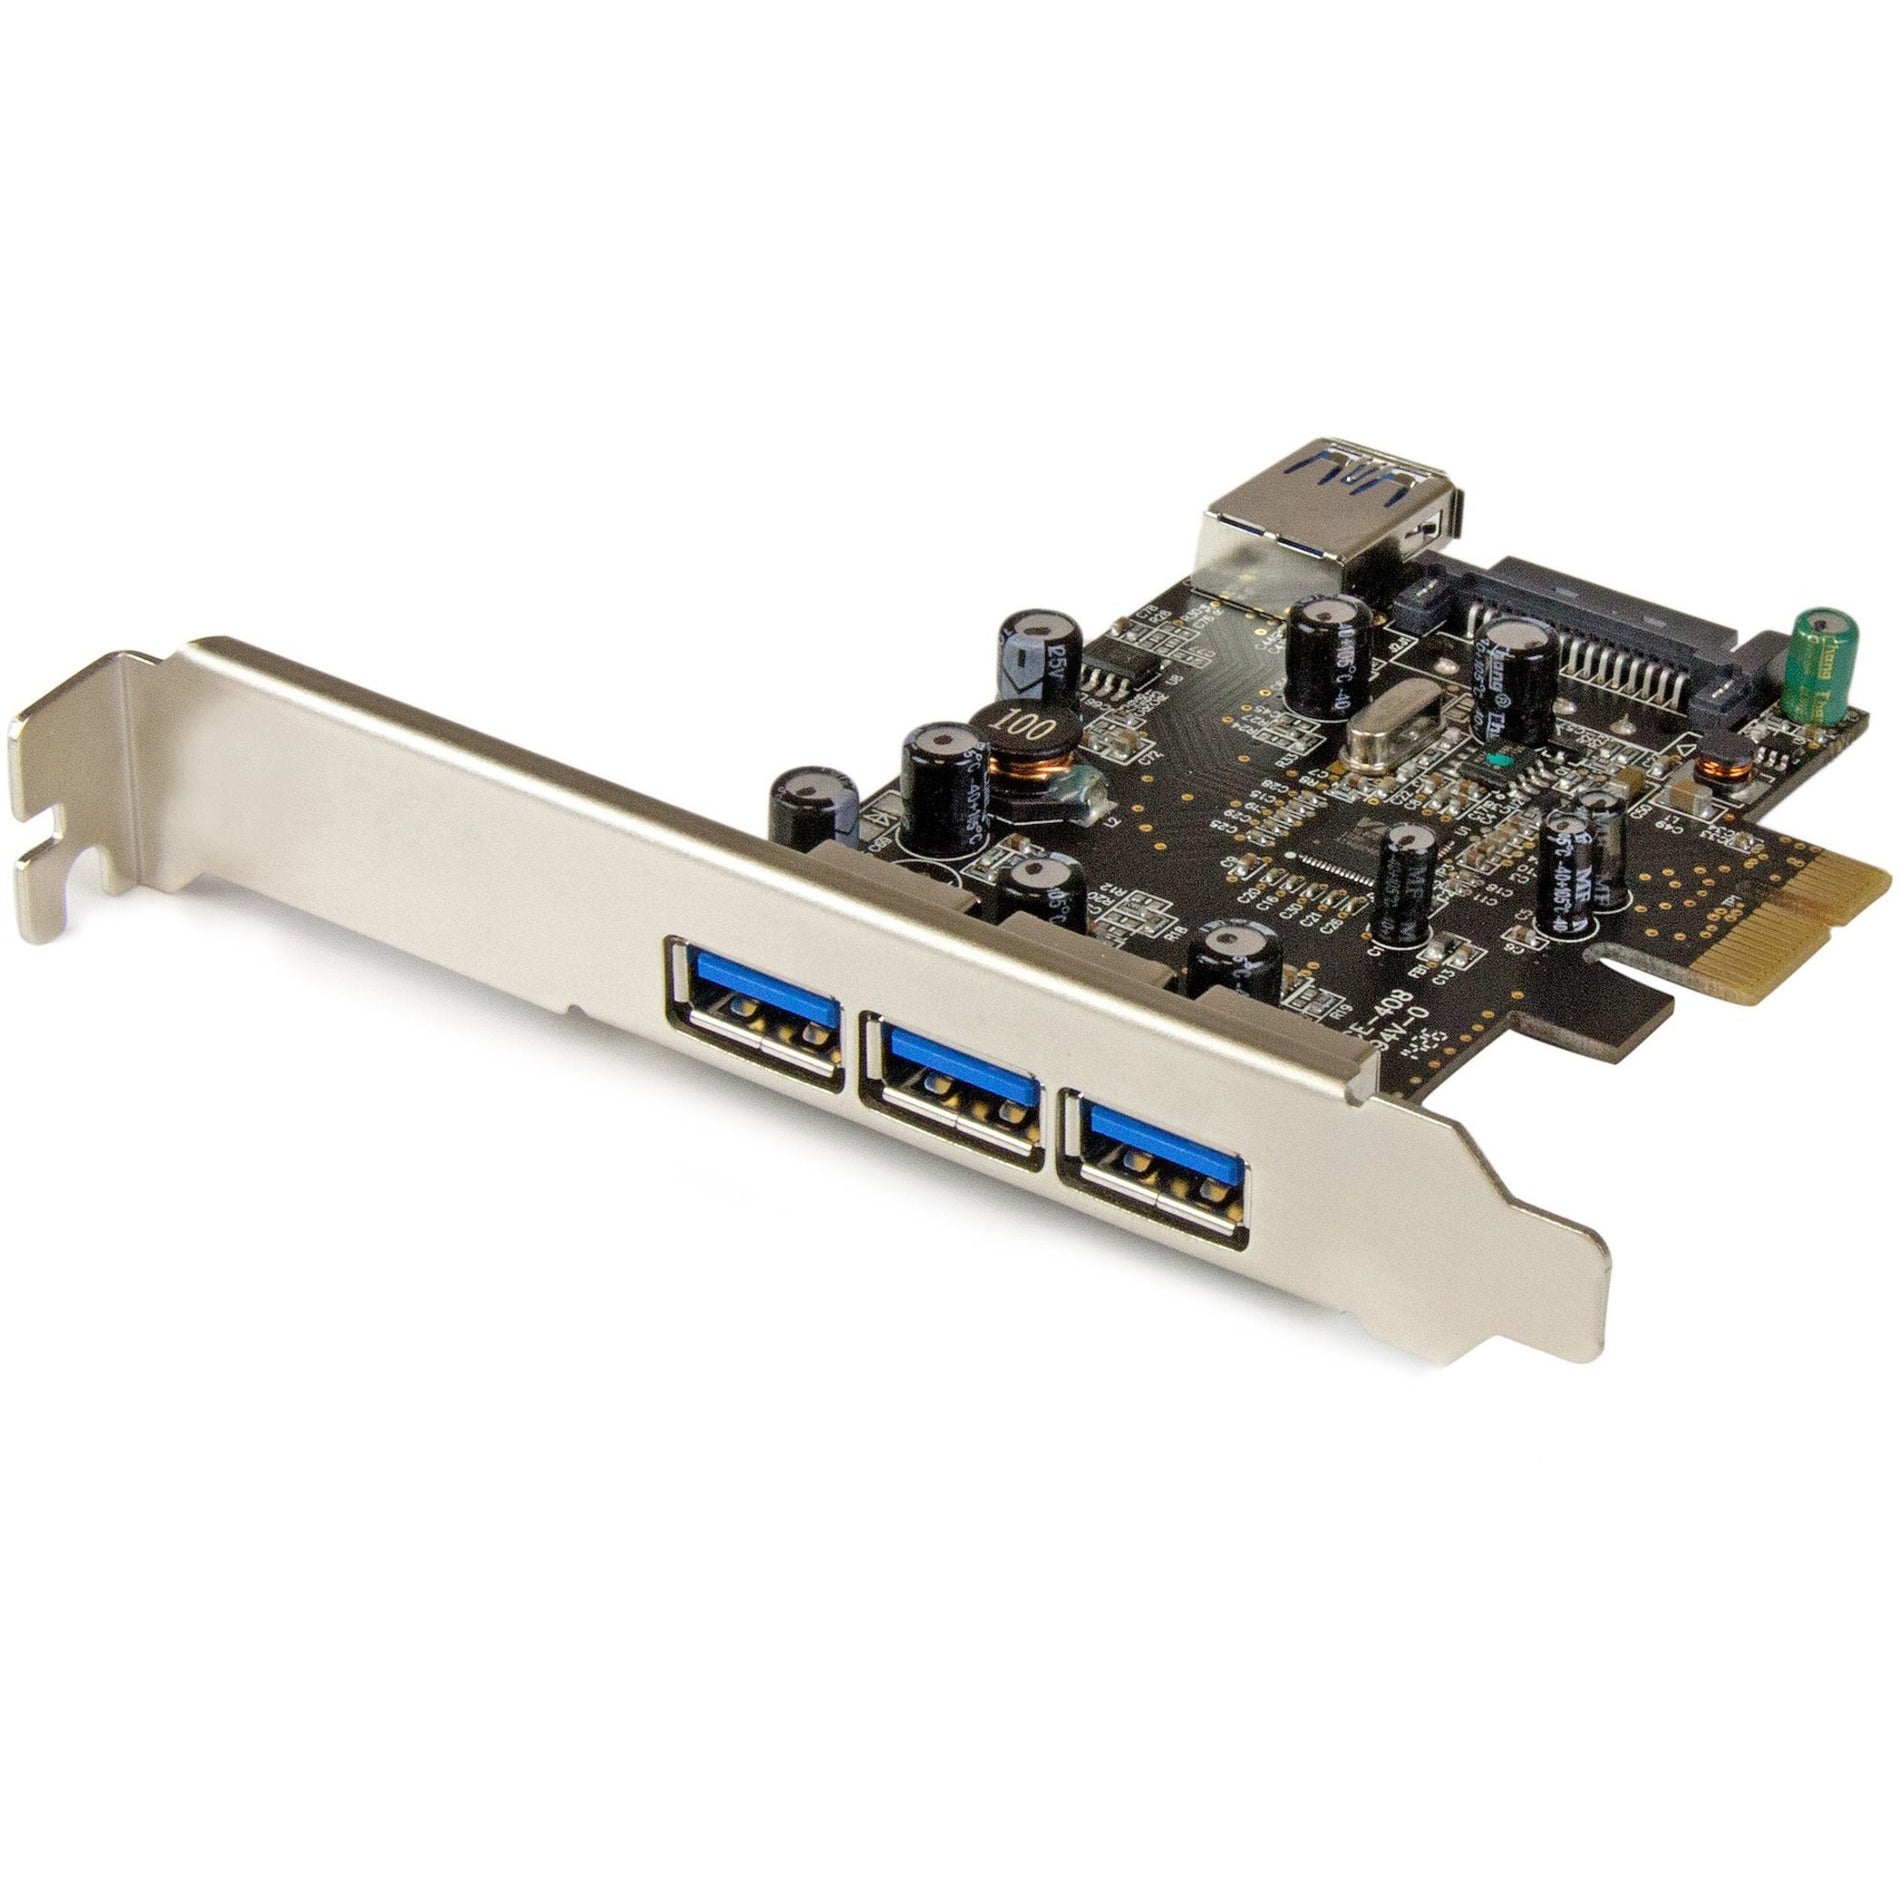 StarTech.com PEXUSB3S42 4-Port PCI Express USB 3.0 Card - 5Gbps, Add High-Speed USB Connectivity to Your PC